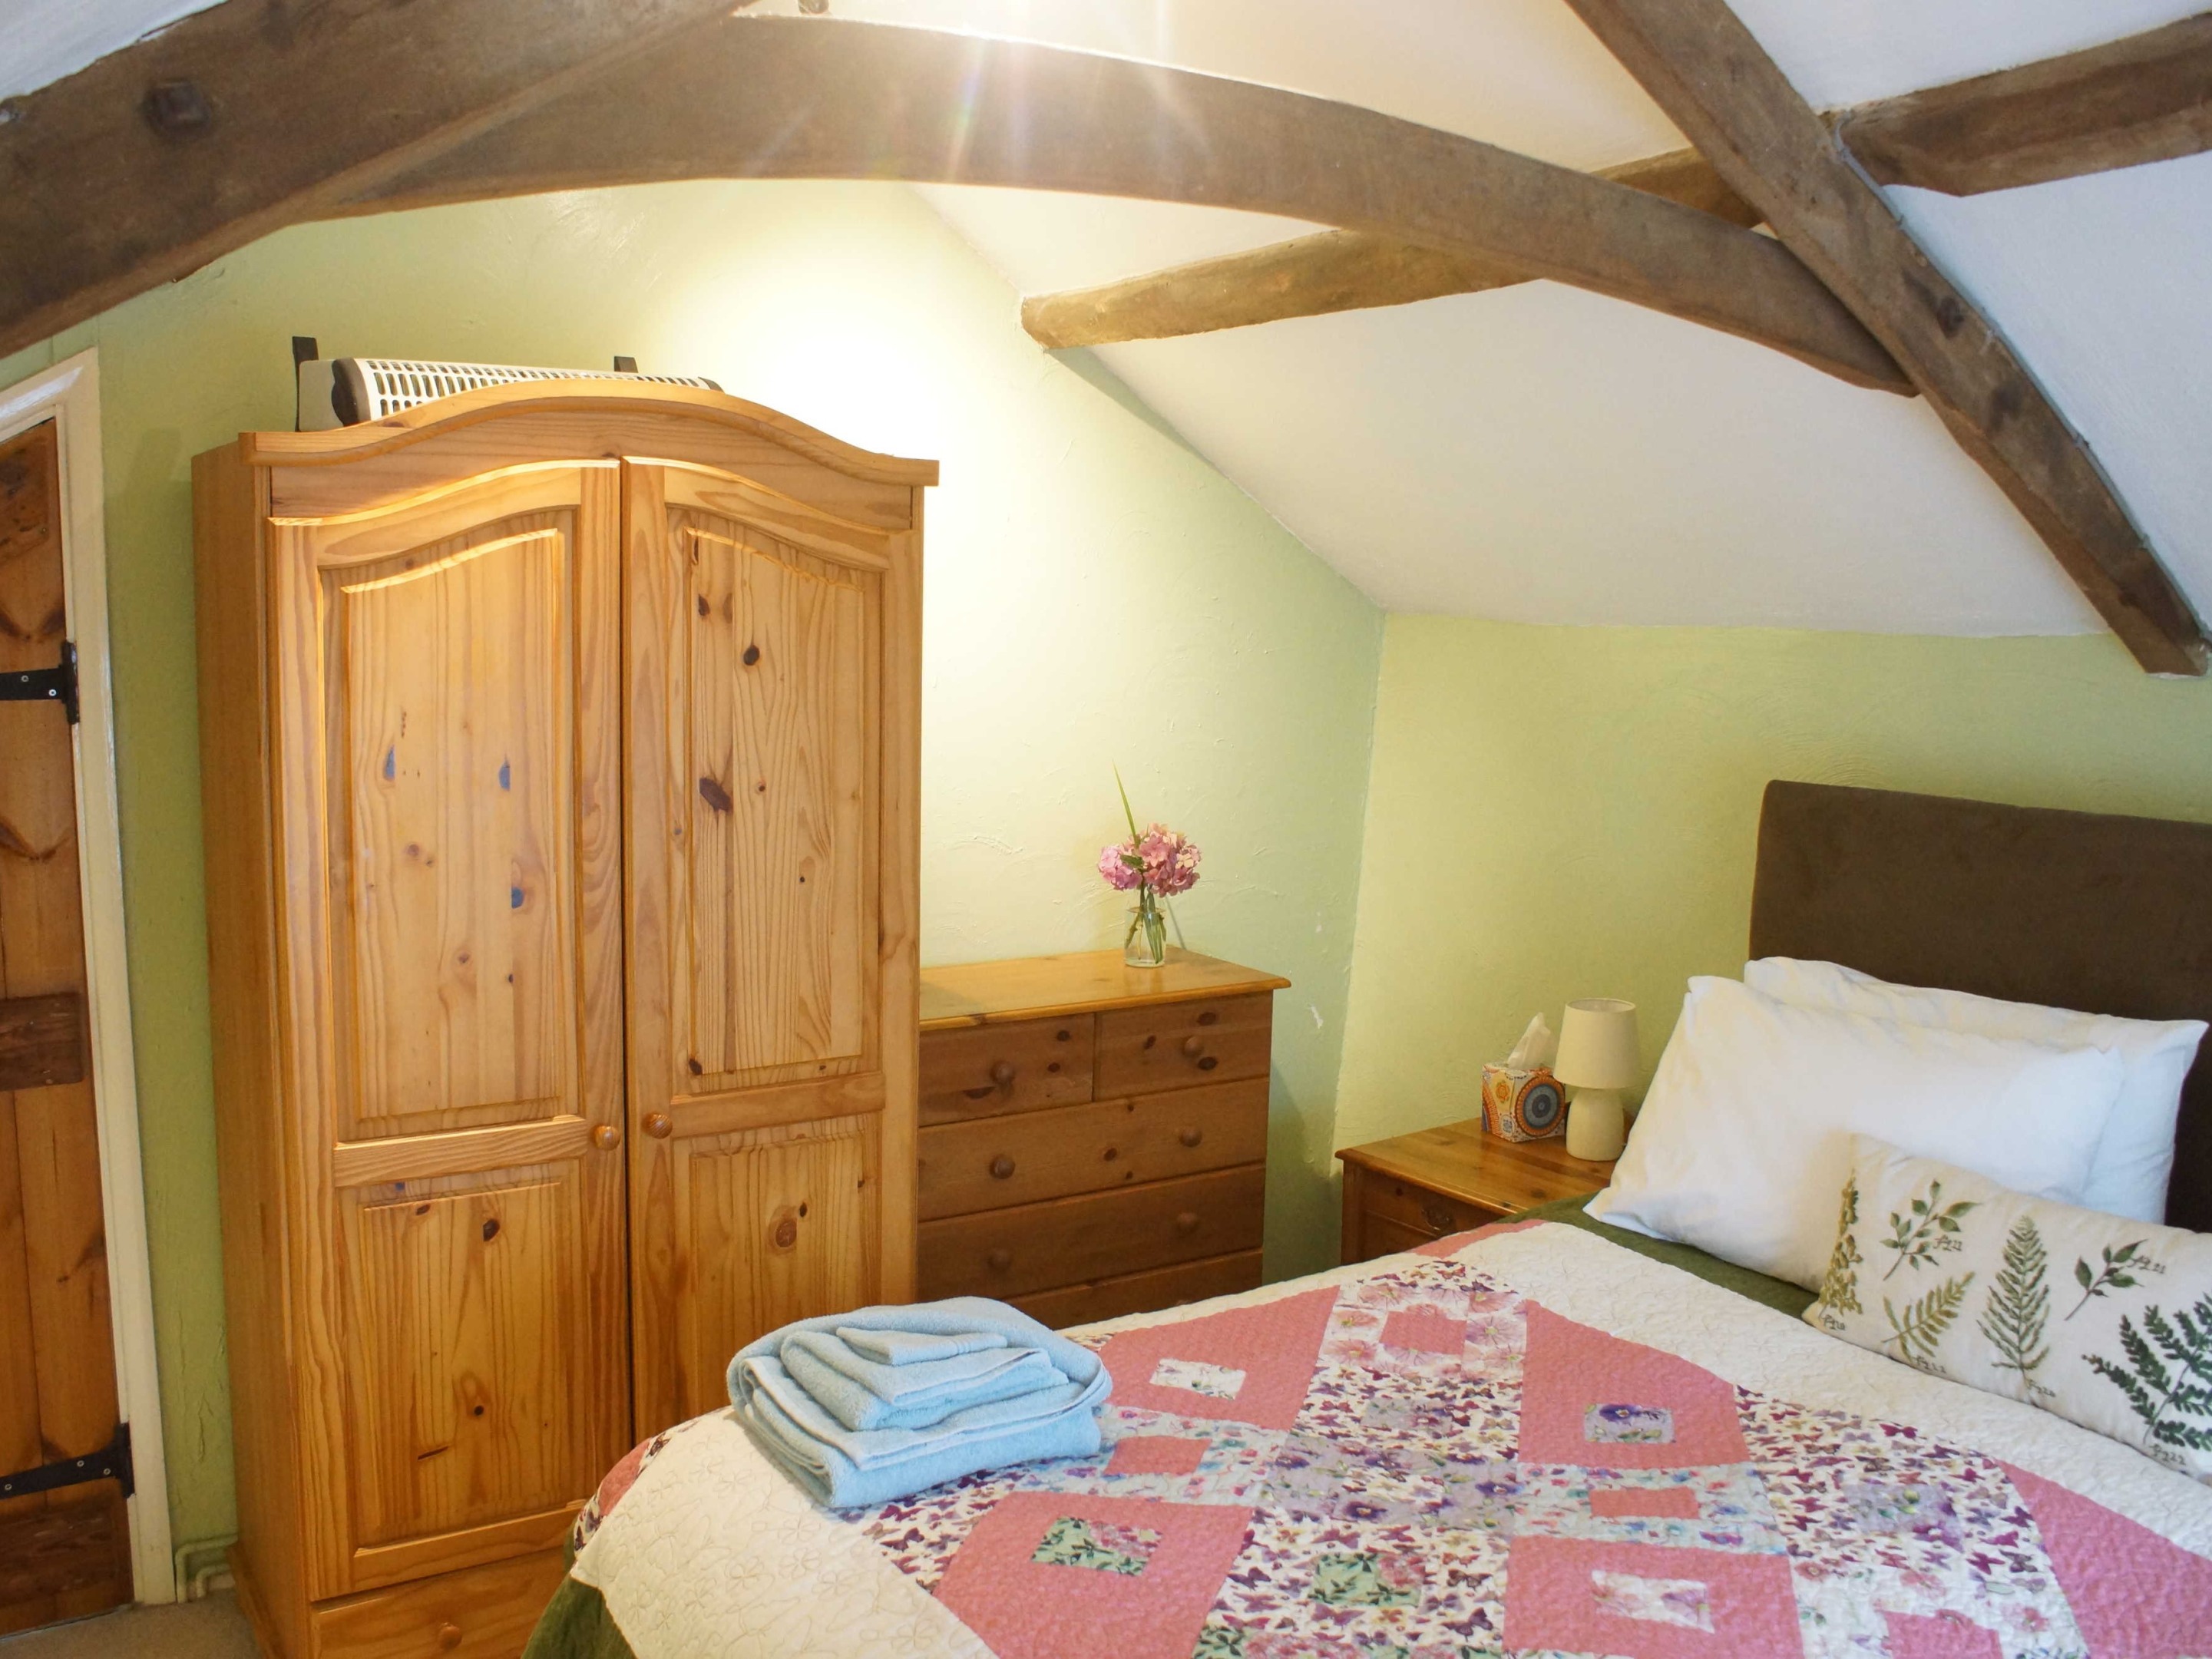 Cottage-Private Bathroom-Garden View-Self Catering - Base Rate